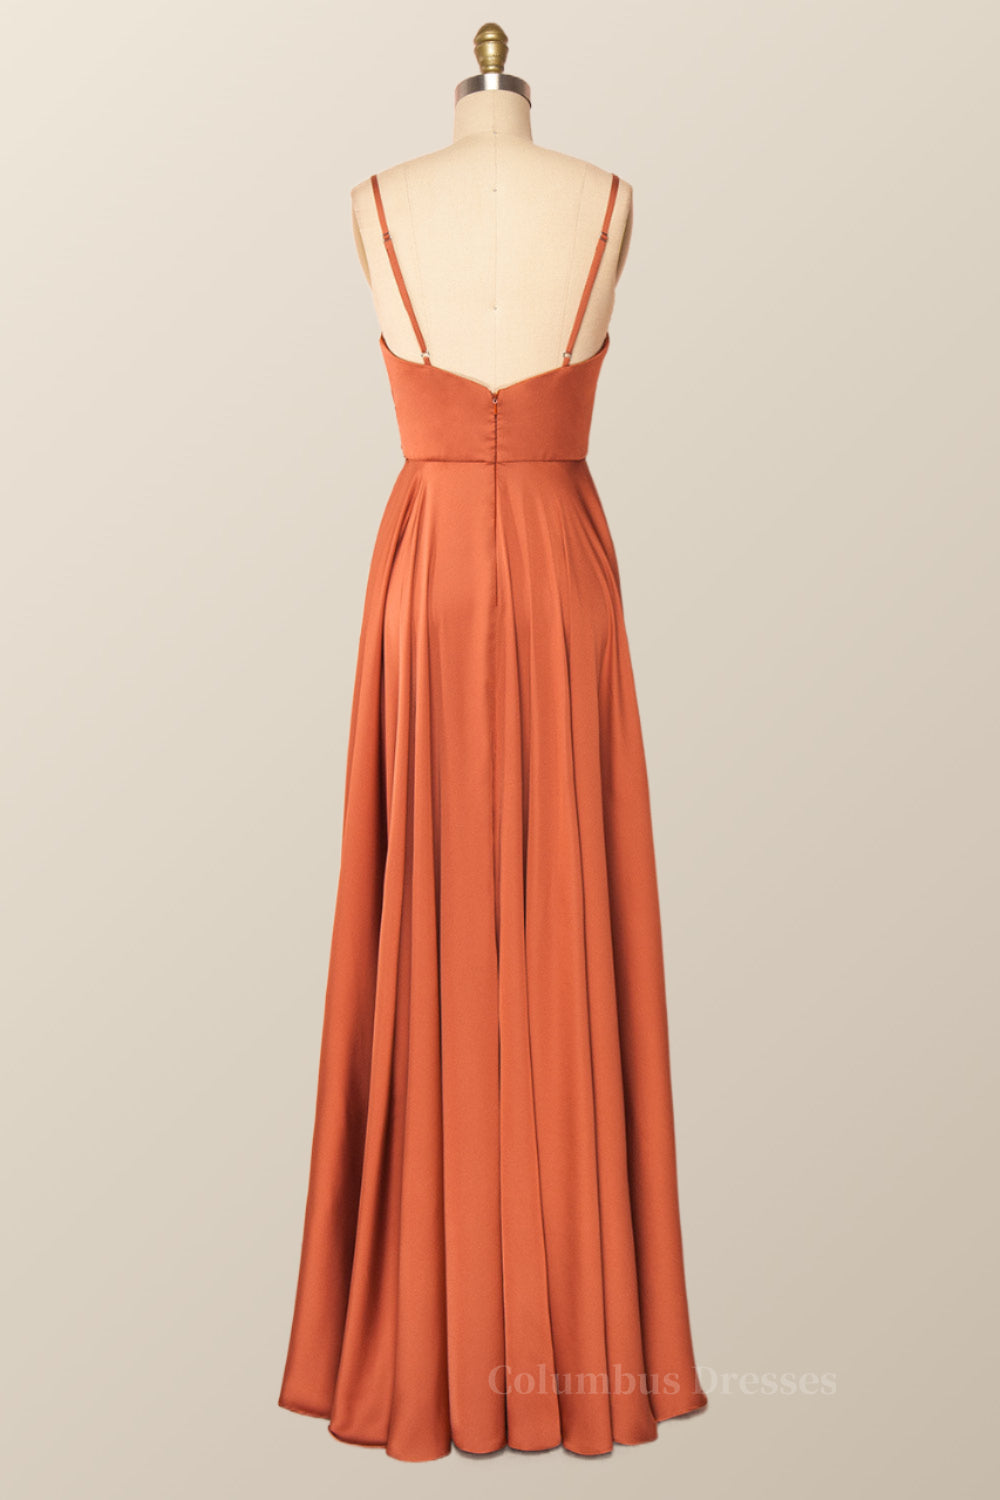 Party Dress Afternoon Tea, Rust Color V Neck Long Party Dress